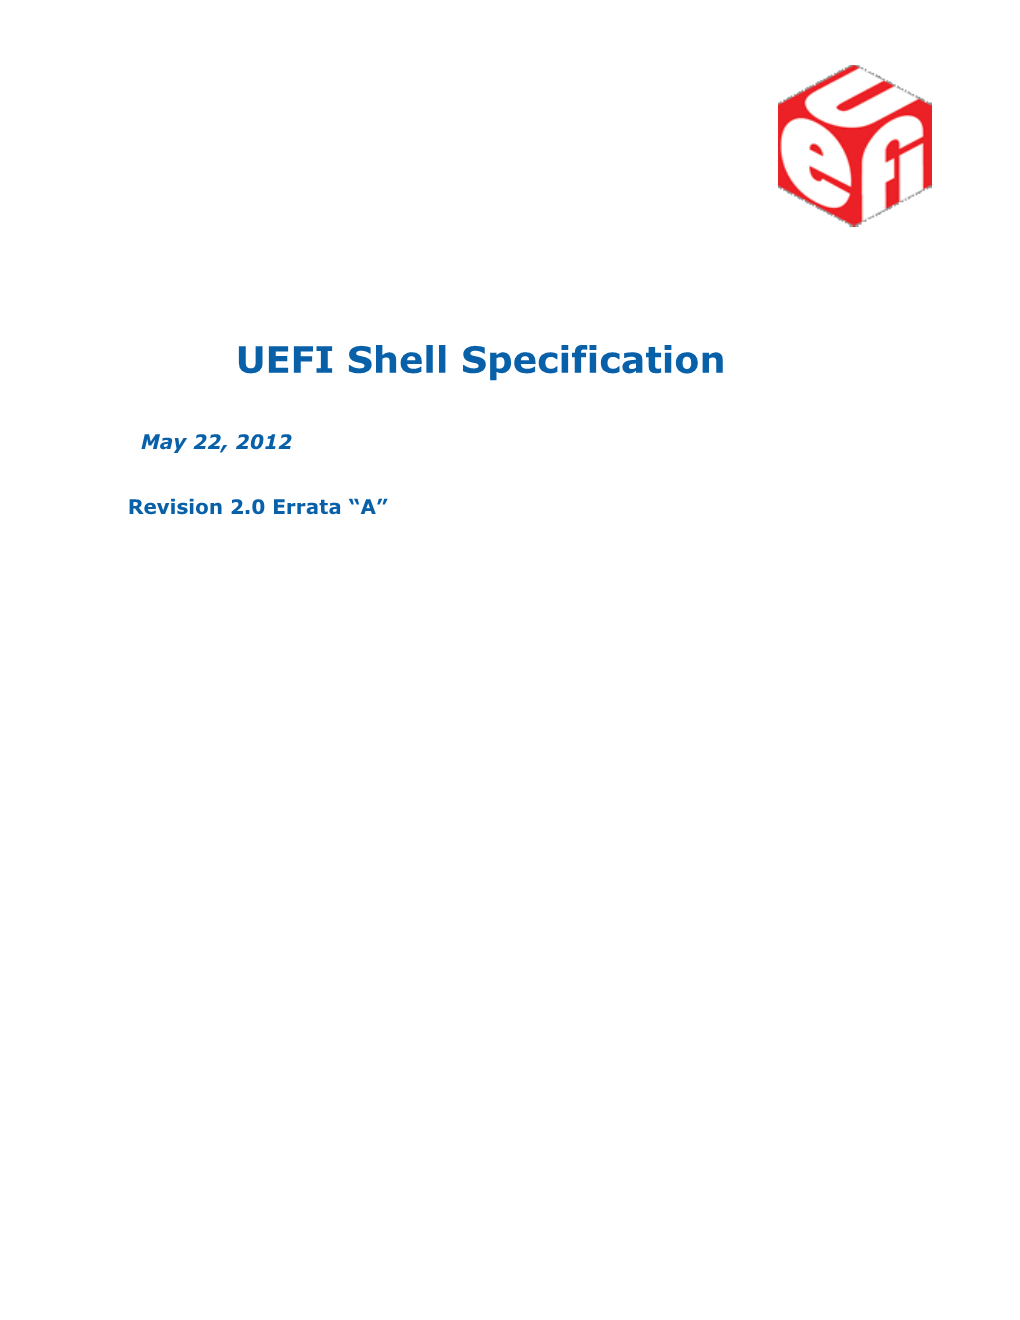 UEFI Shell Specification